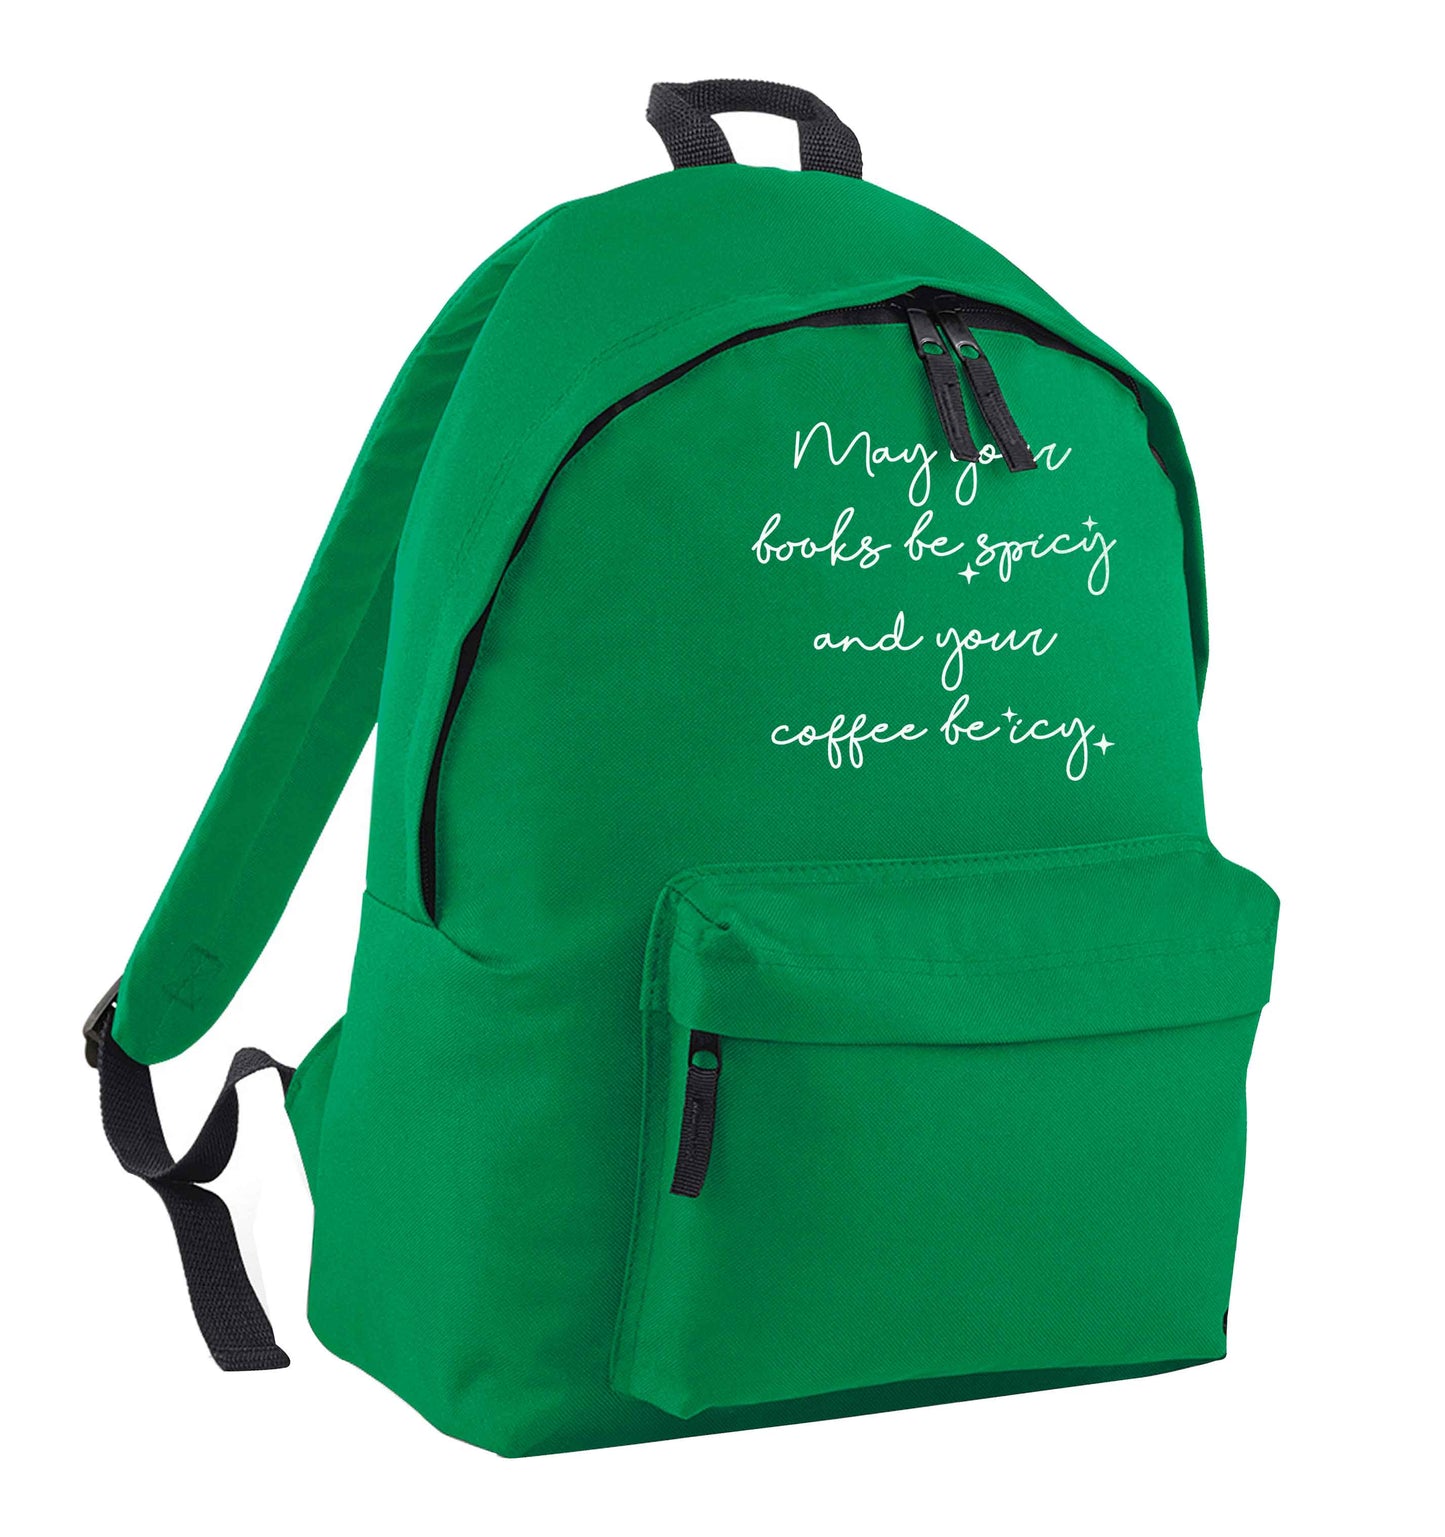 May your books be spicy and your coffee be icy green adults backpack